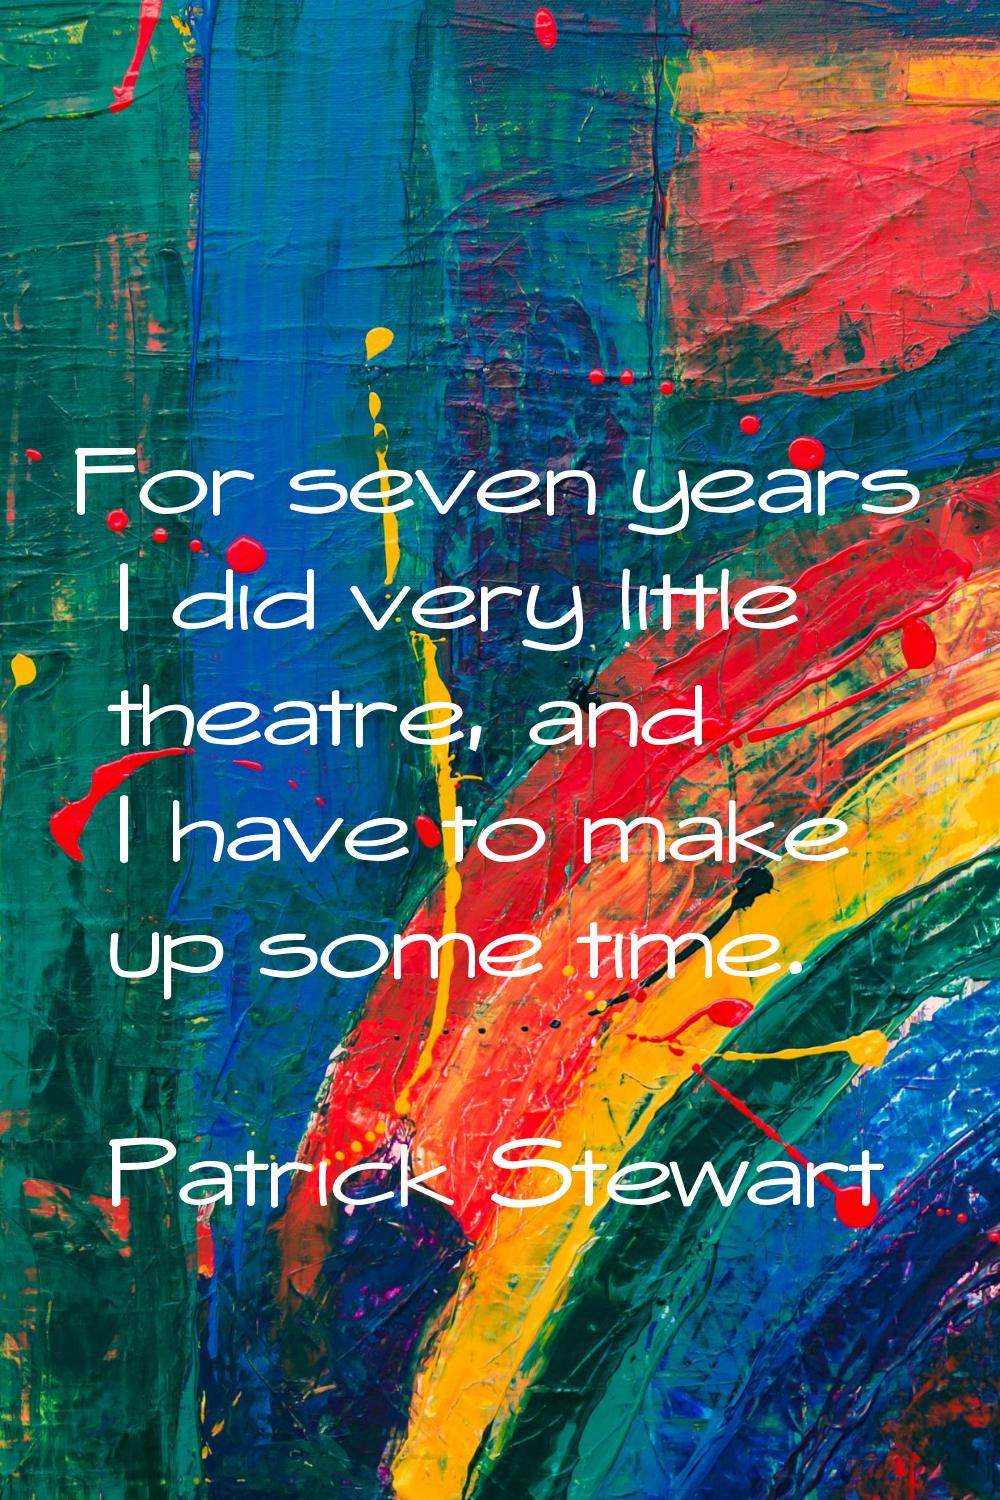 For seven years I did very little theatre, and I have to make up some time.